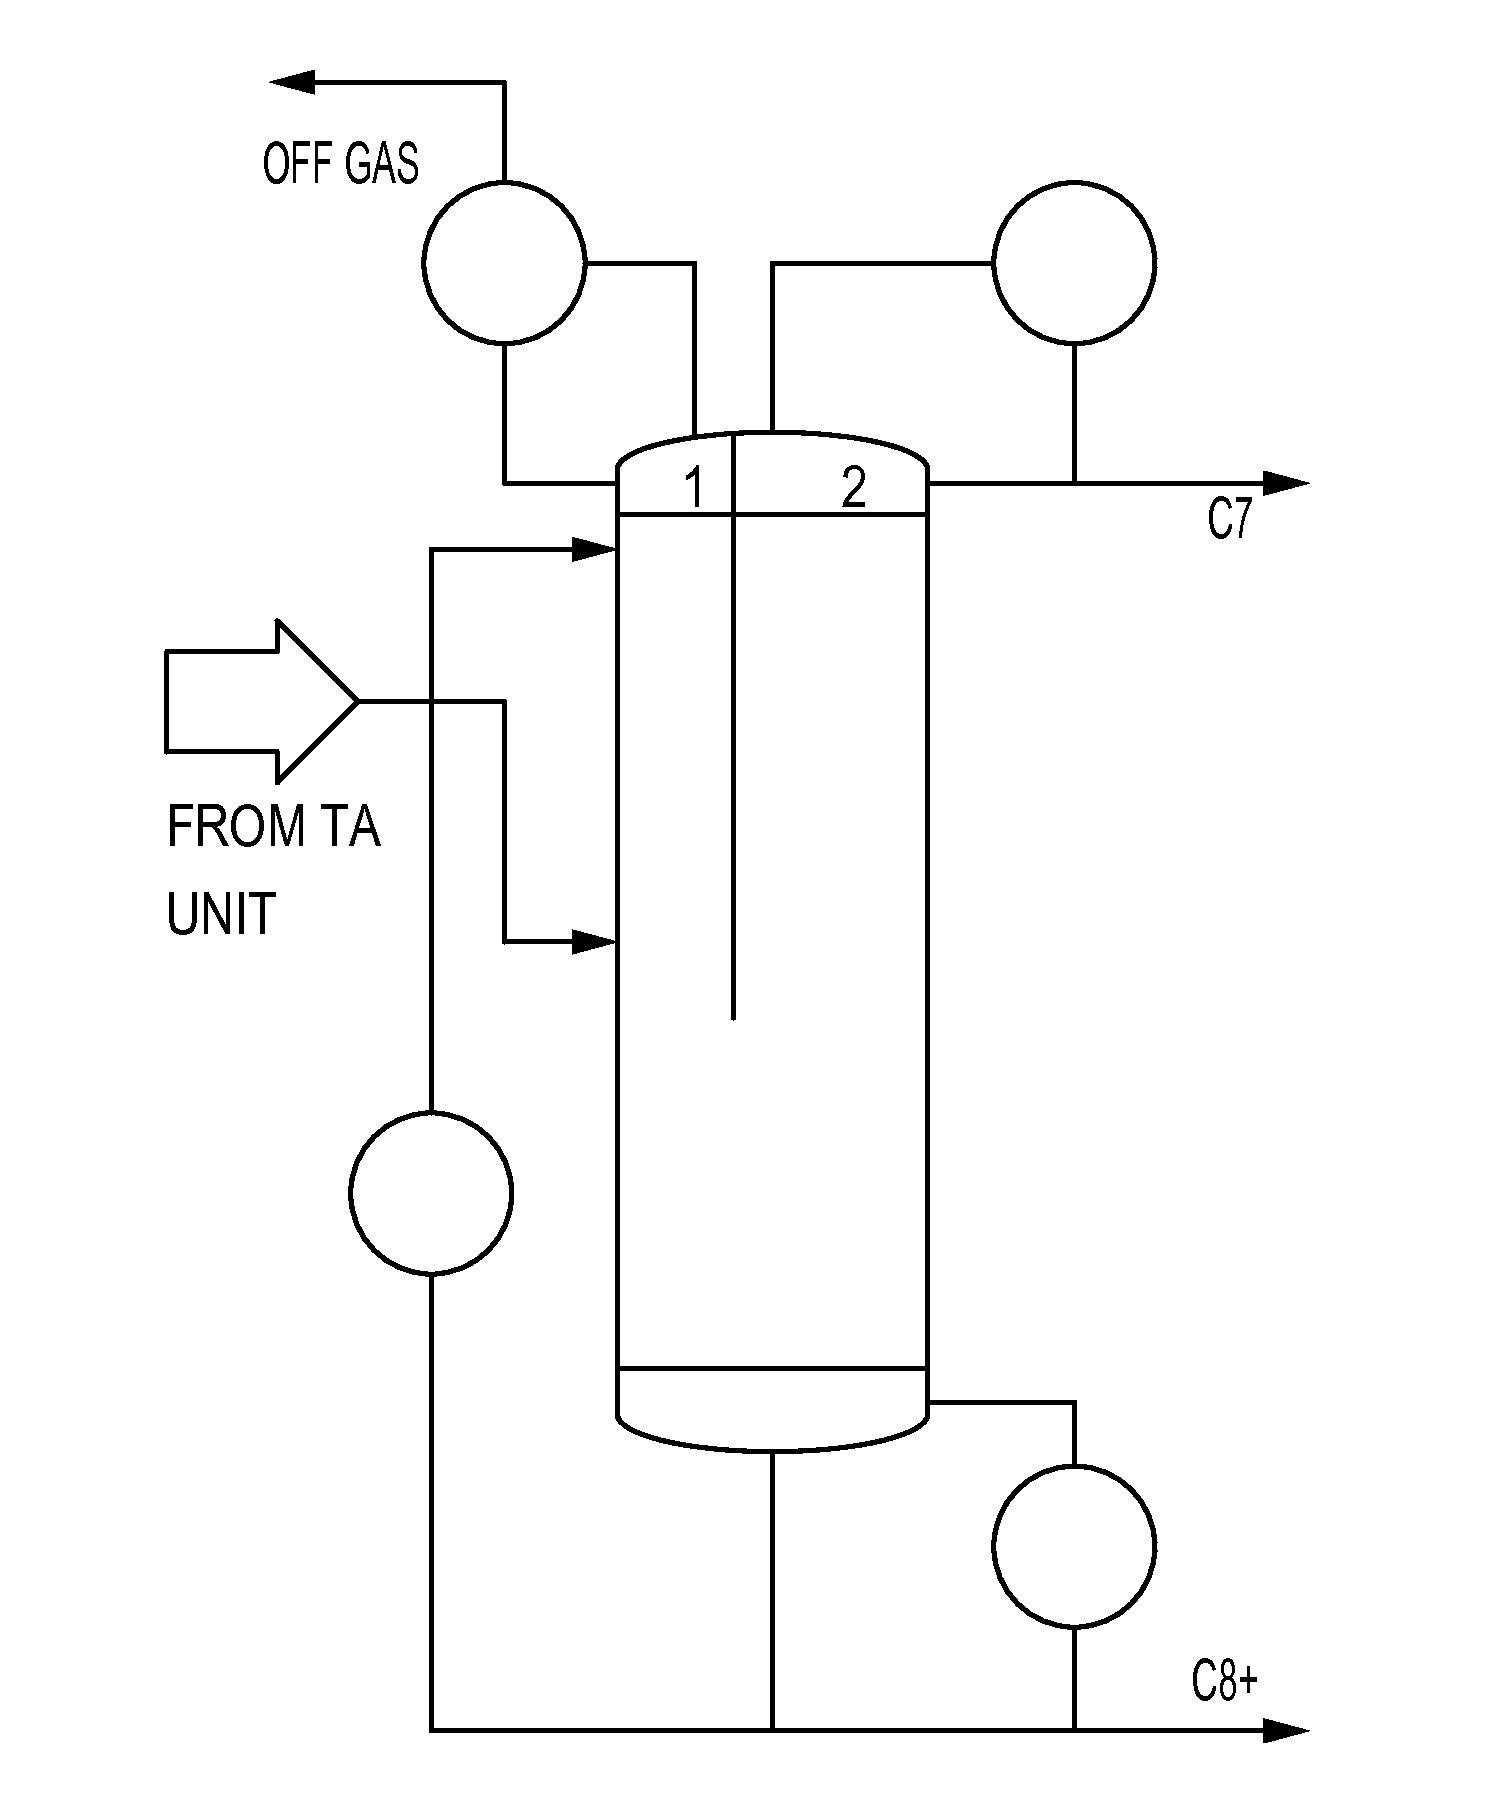 Method of carrying out absorption/distillation in a single column design